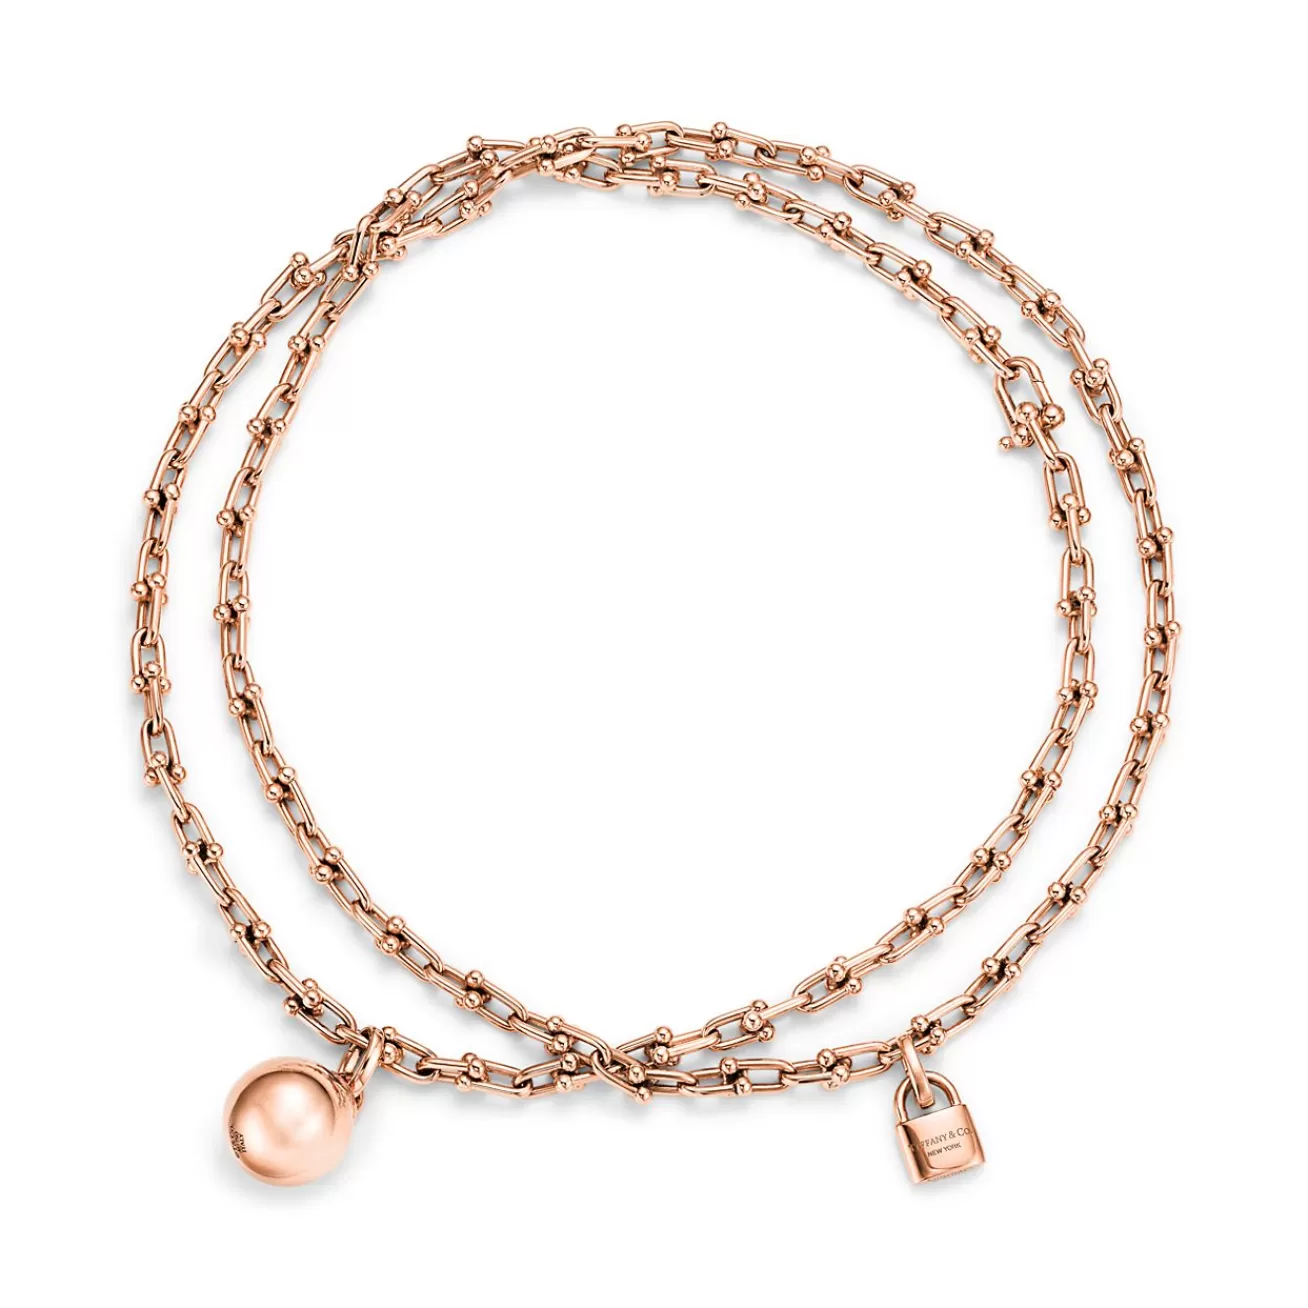 Tiffany & Co. Tiffany HardWear Small Wrap Necklace in Rose Gold | ^ Necklaces & Pendants | Men's Jewelry